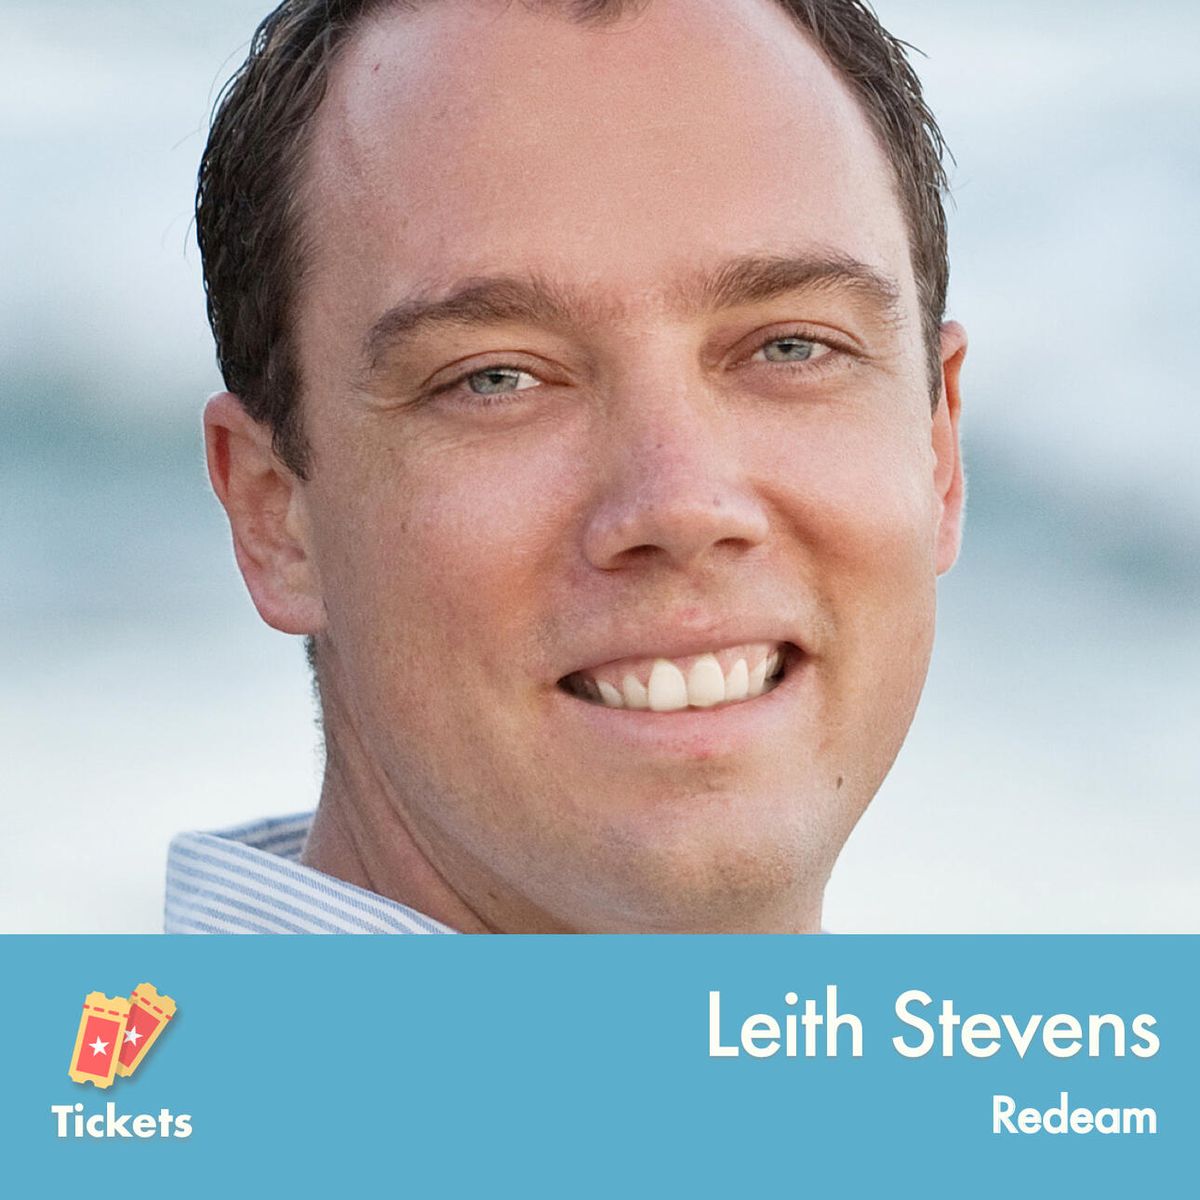 Tickets Podcast: What’s next in travel & tourism ticketing with Leith Stevens of Redeam